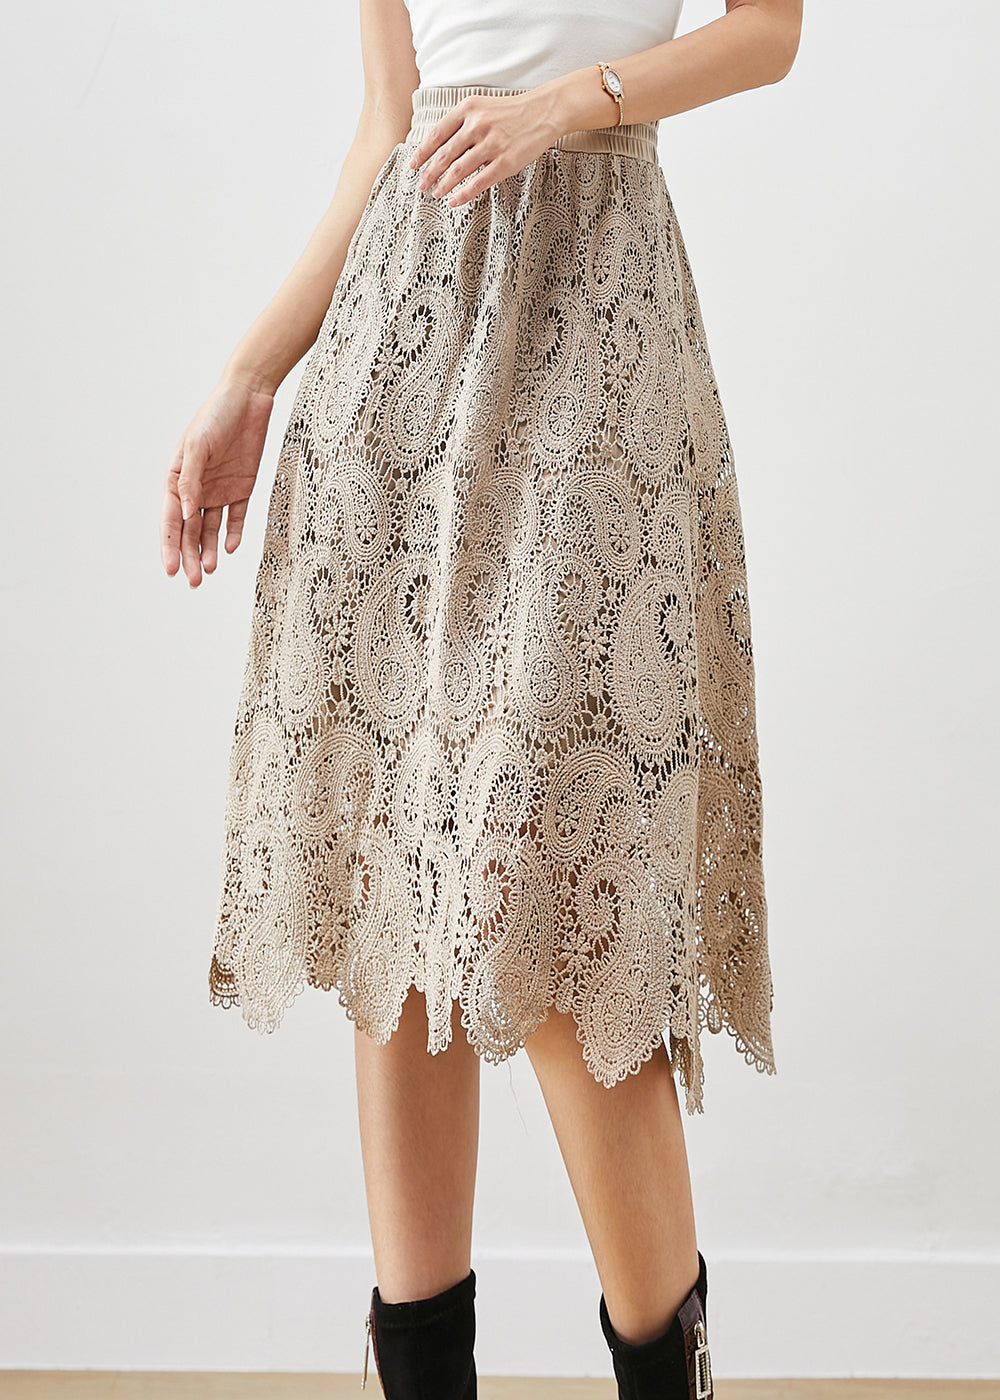 French Khaki Hollow Out Lace Skirts Fall